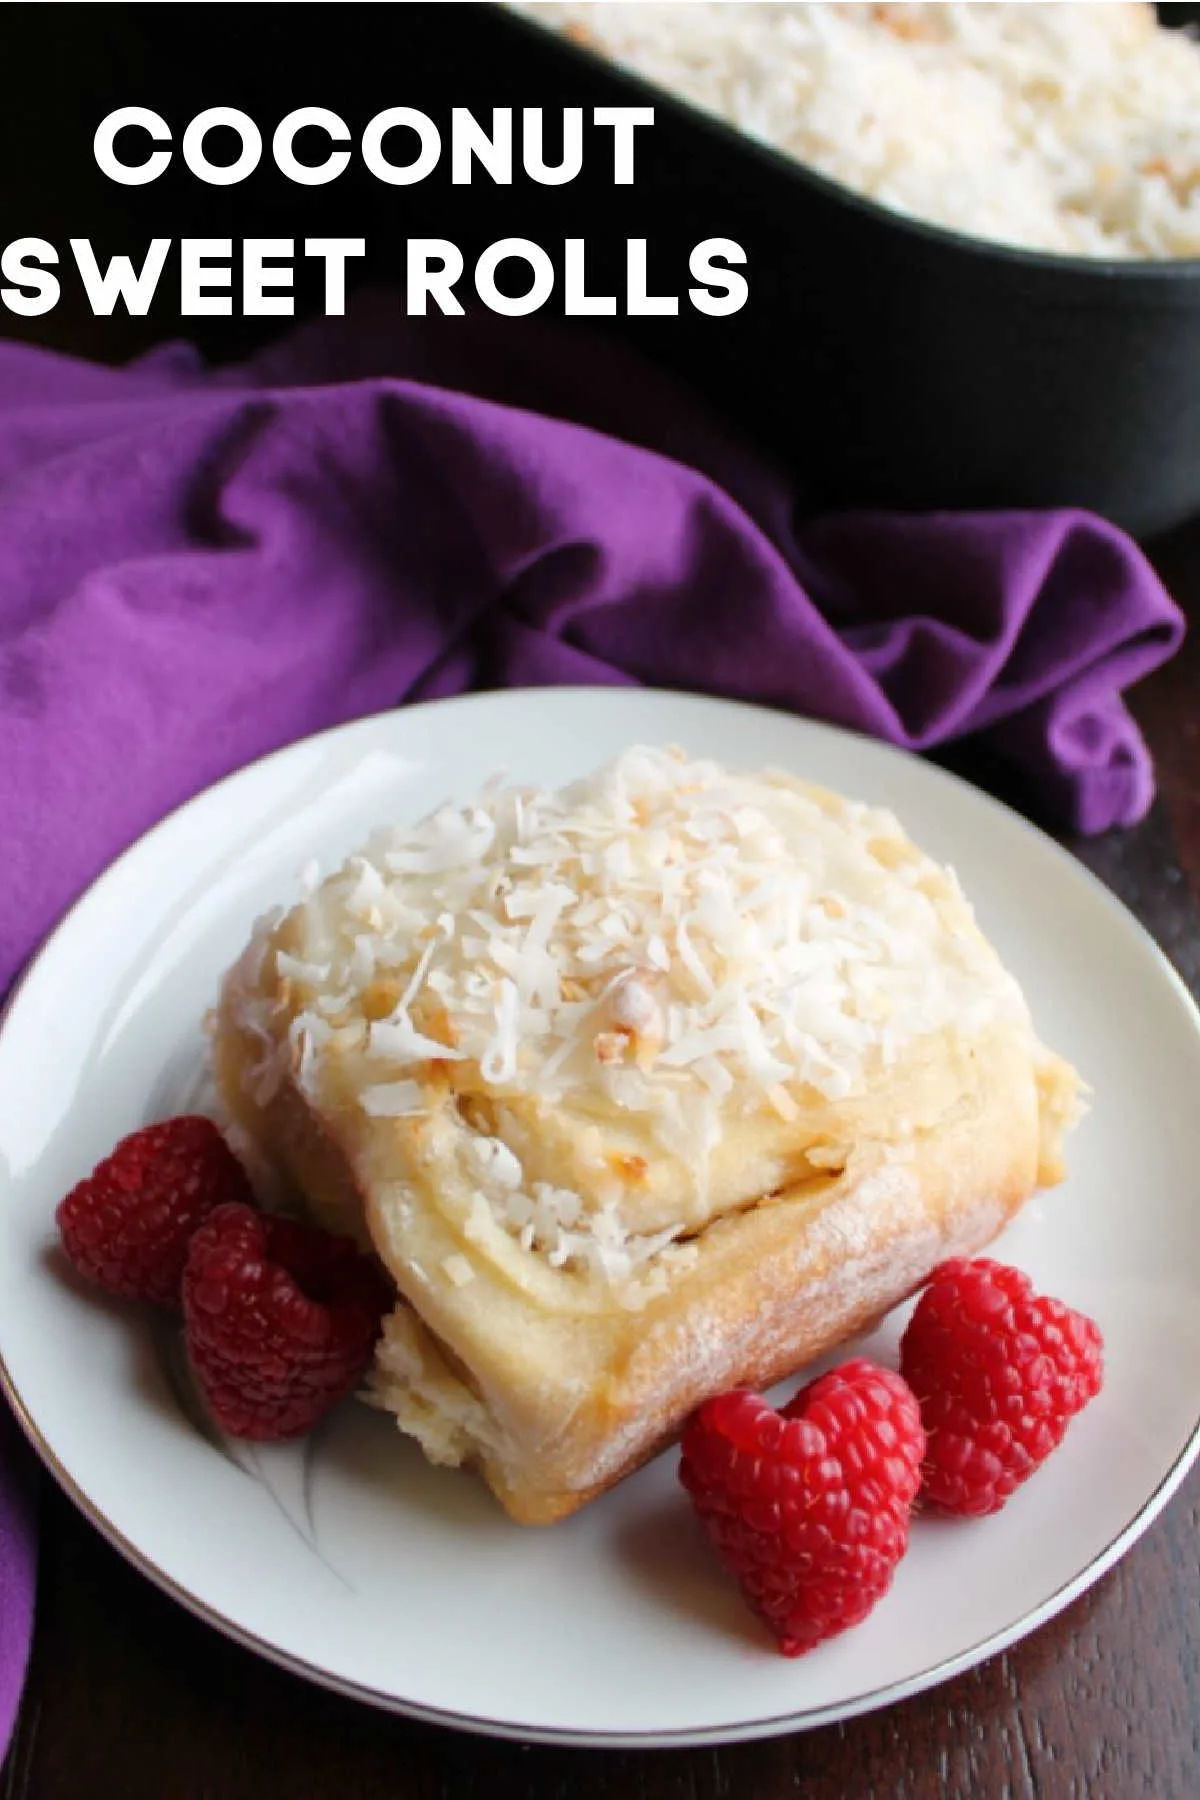 Sweet coconut goodness in a cinnamon roll-like package. These sweet rolls are loaded with coconut and are the perfect breakfast or brunch treat for Easter or any day!